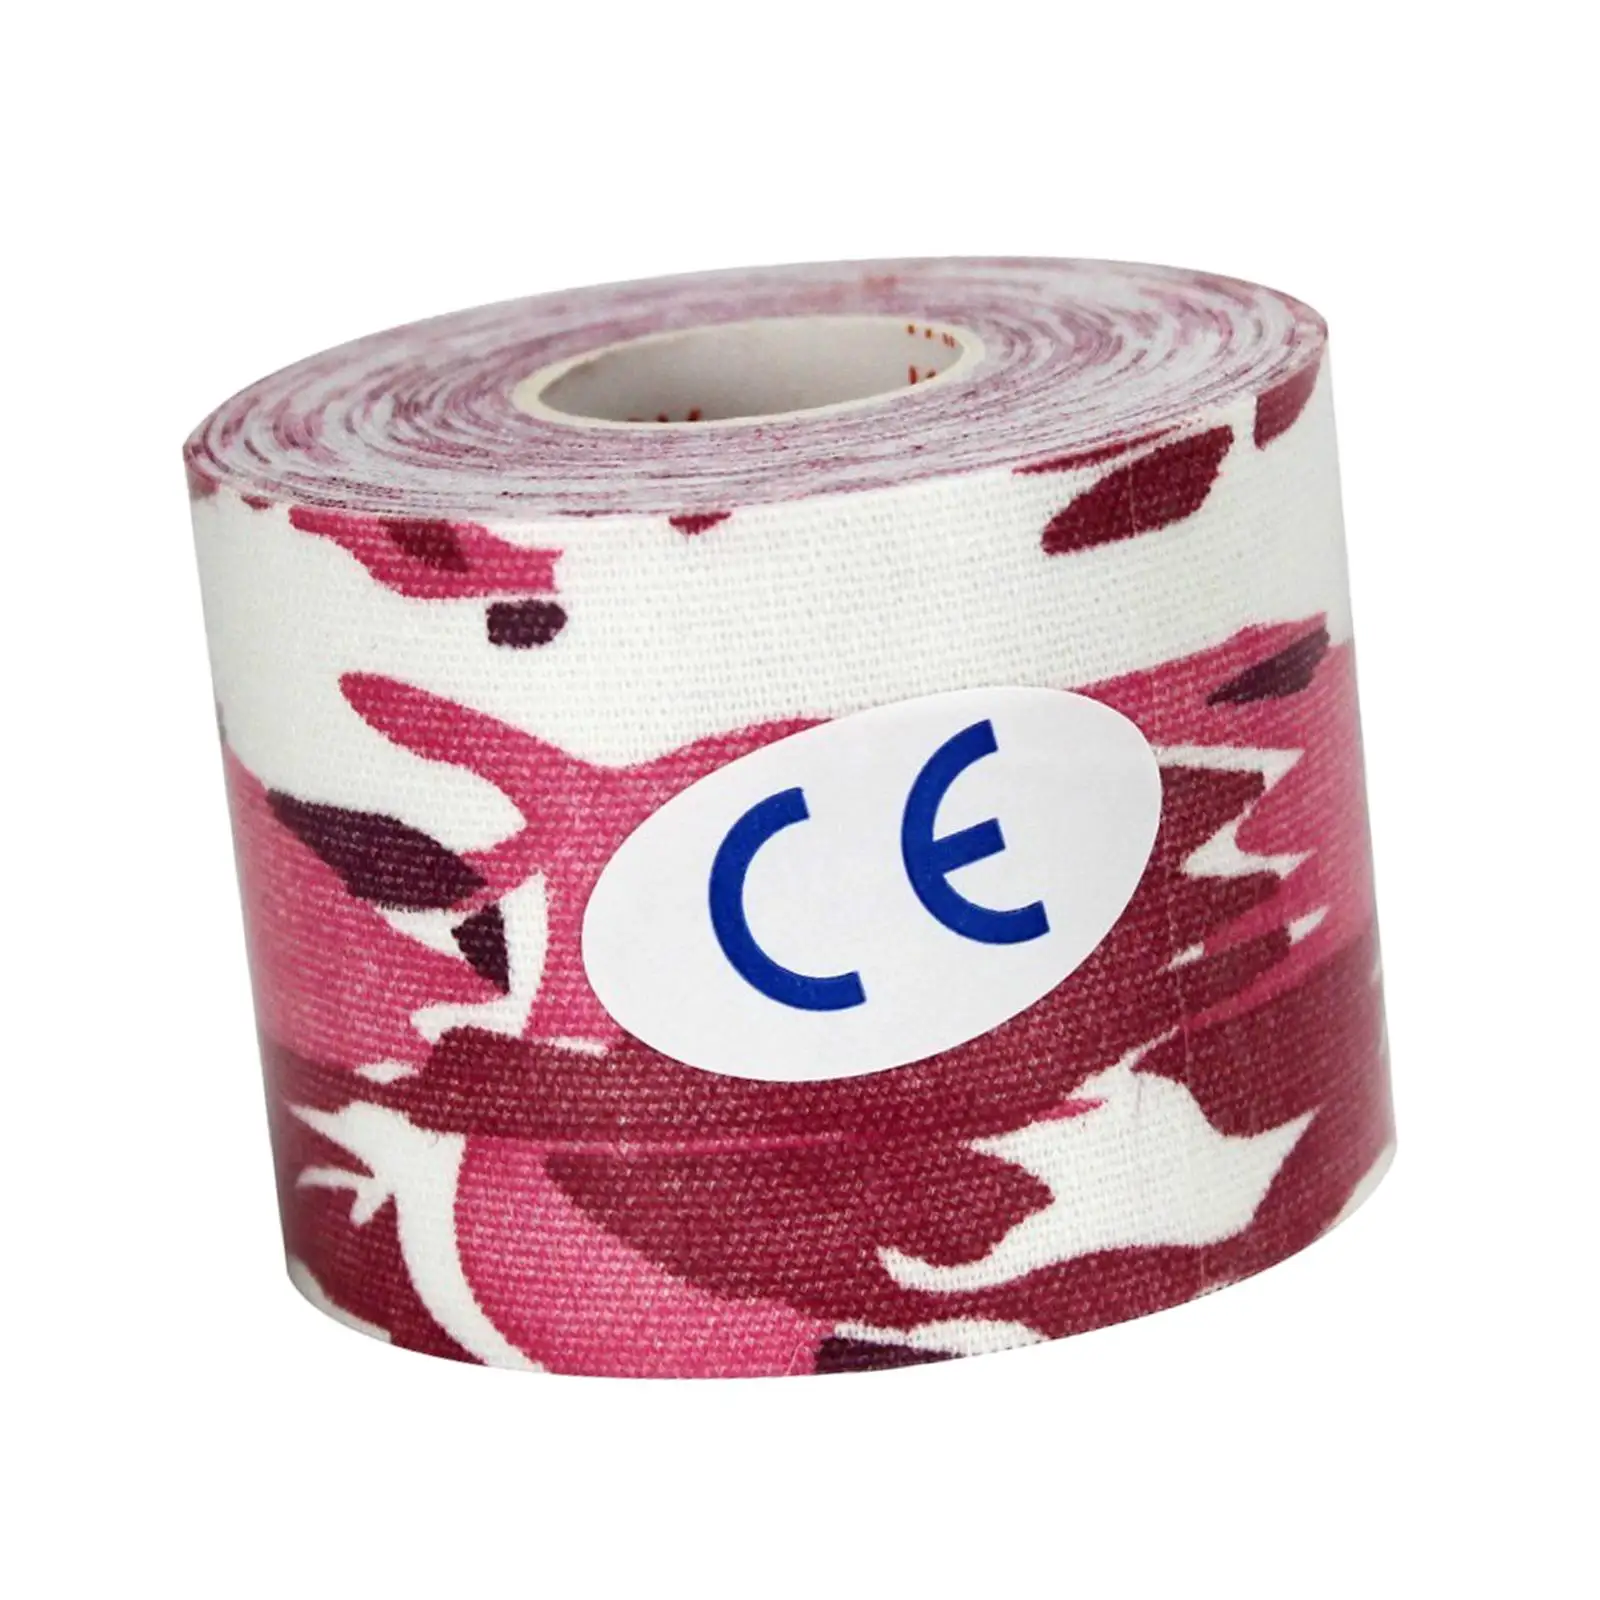 Athletic Tape Elastic Protective Tape Water Resistant Self Sticky 5cmx5M Sports Tape Wrap for Wrist Knee Body Joint Football